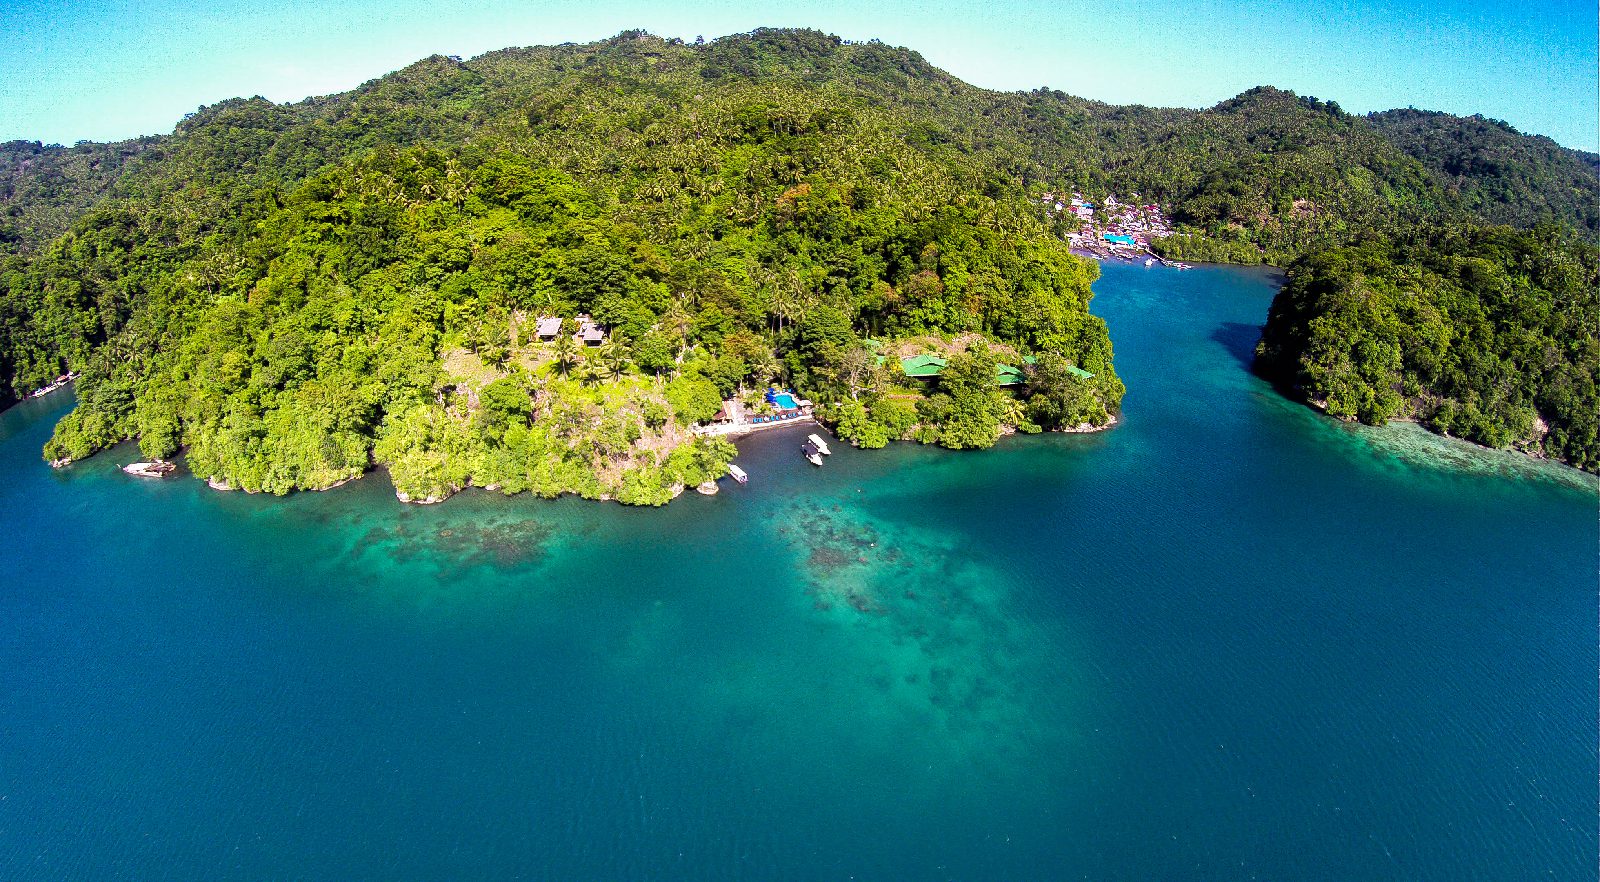 A Bird's Eye View of our Resort at Lembeh